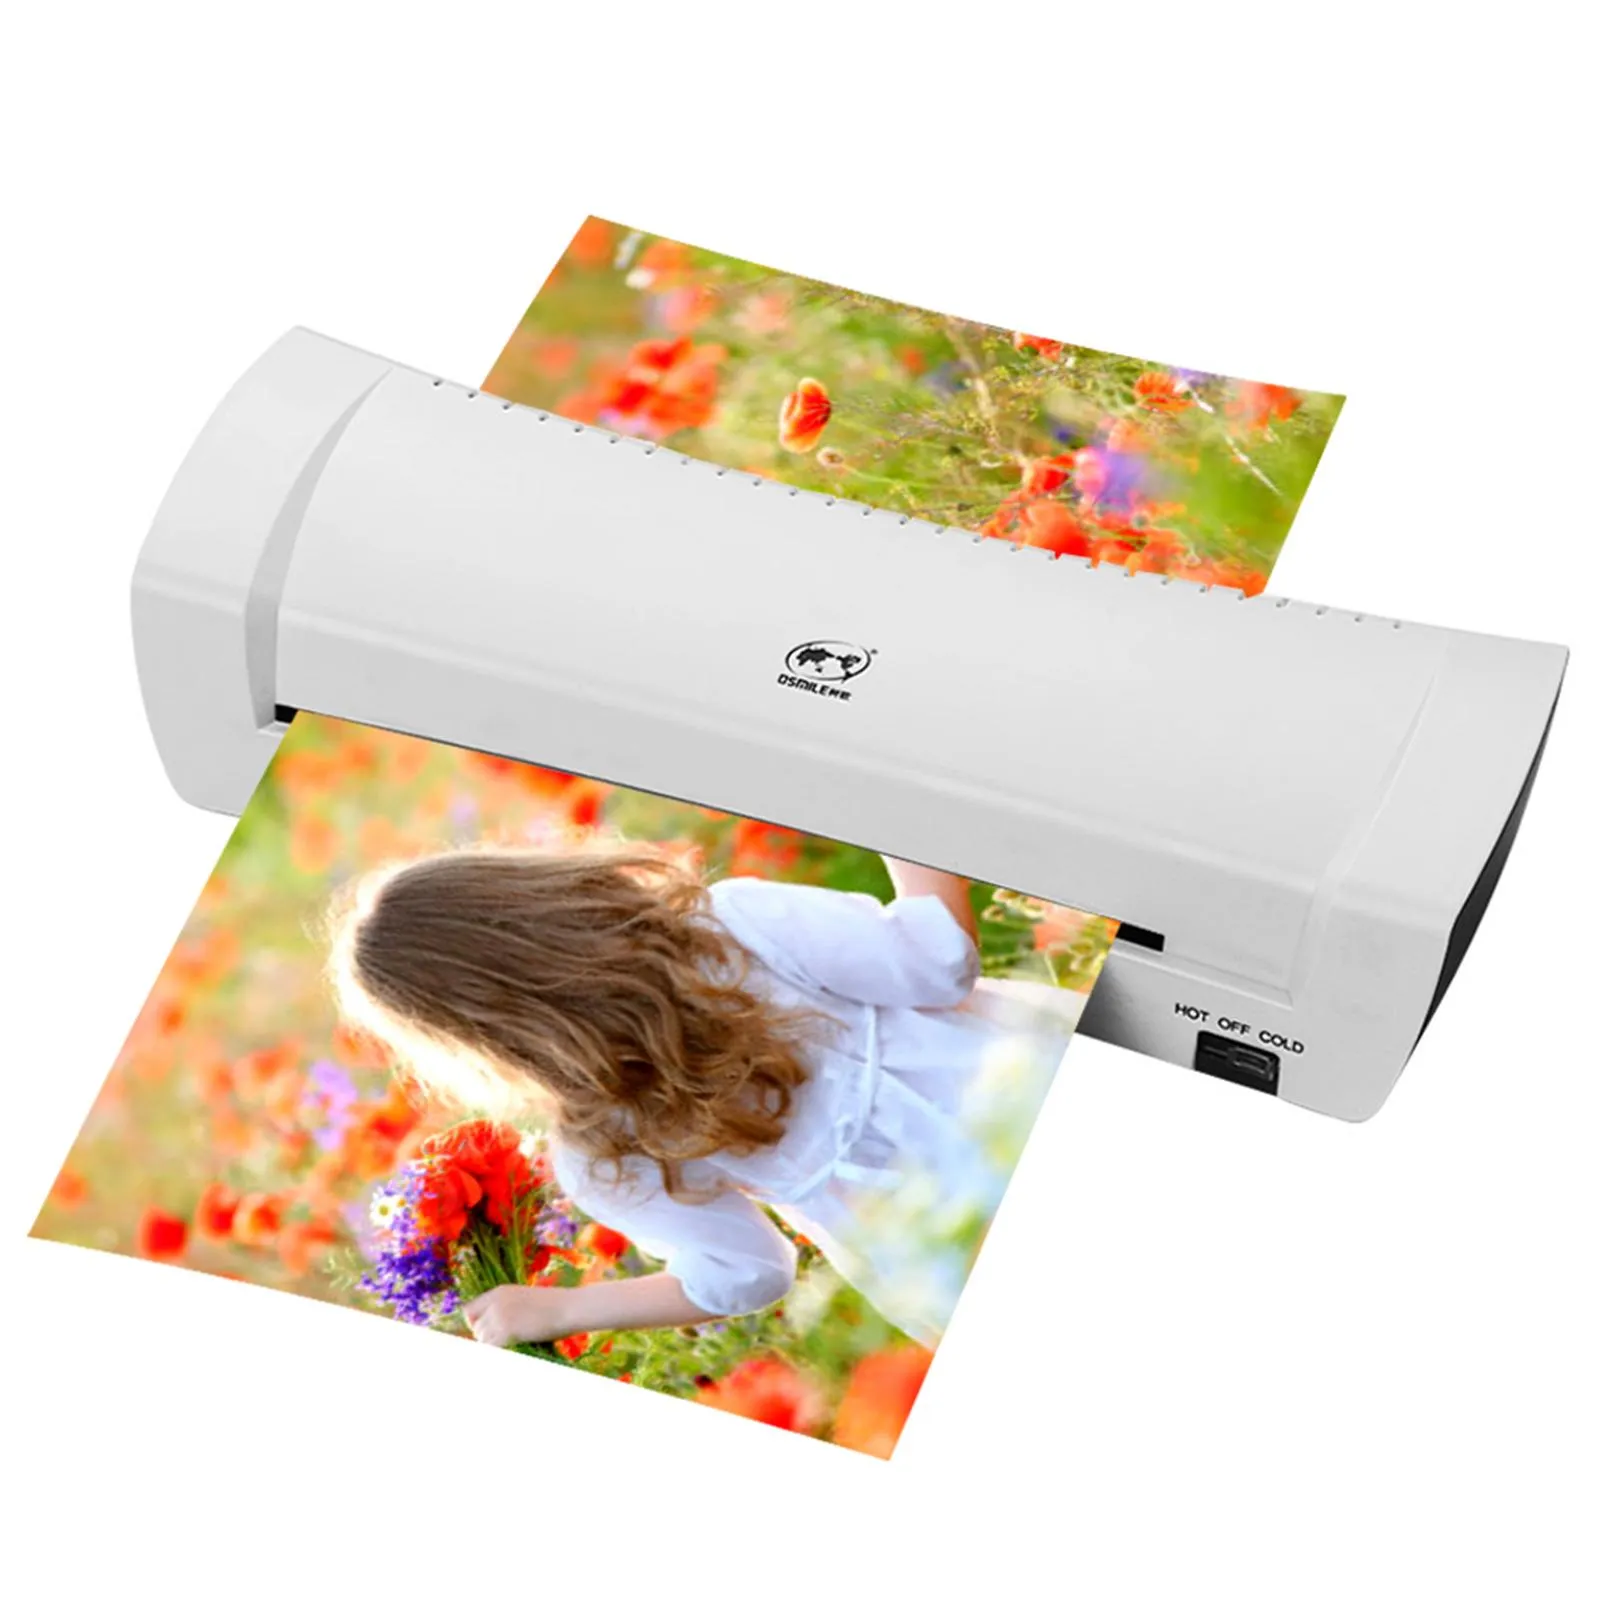 Laminator A4 Laminator Machine Hot and Cold Laminating Machine Two Rollers Laminator for Document Photo Picture Credit Card School Office